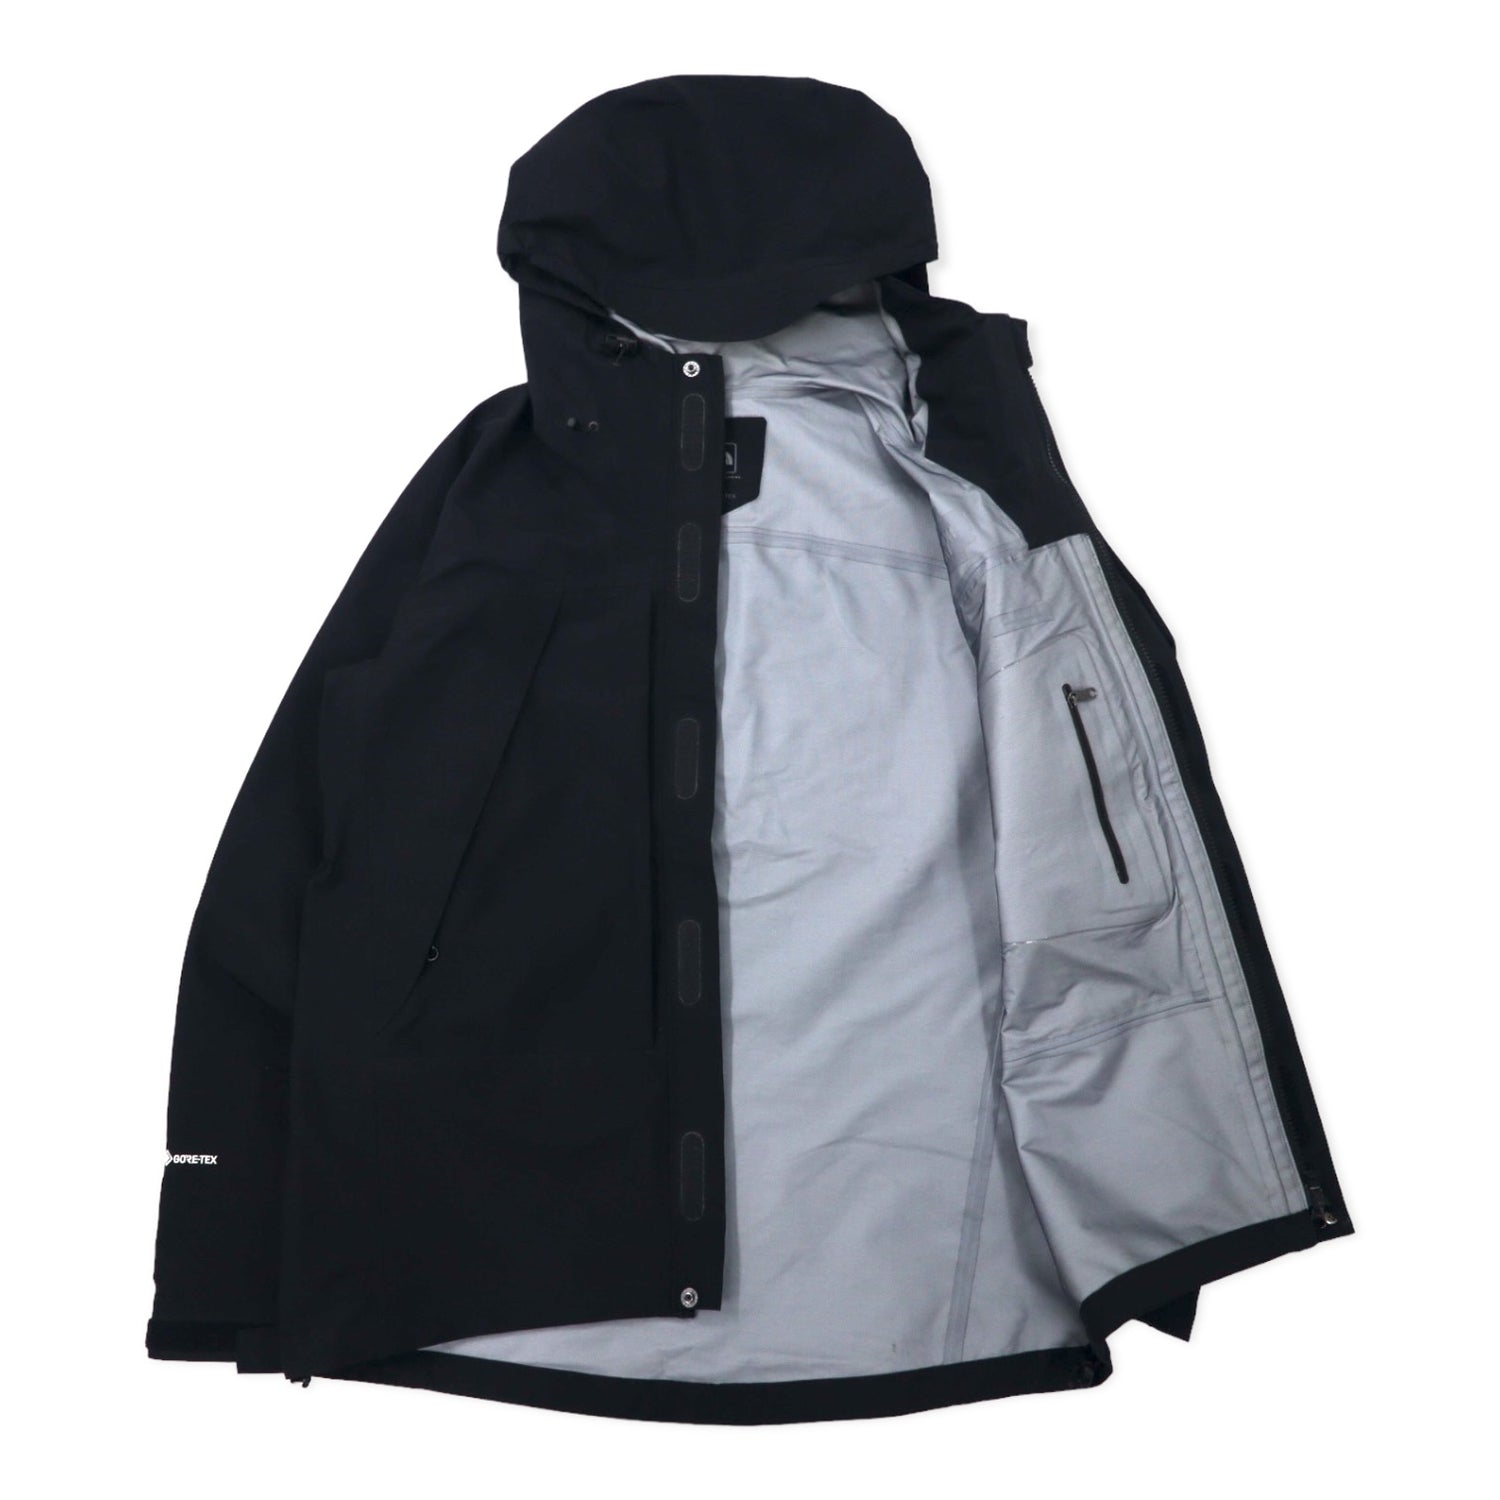 THE NORTH FACE GORE-TEX All Mountain Jacket XL Black Nylon GORE-TEX  Waterproof ALL MOUNTAIN JACKET NP61910 Unused – 日本然リトテ